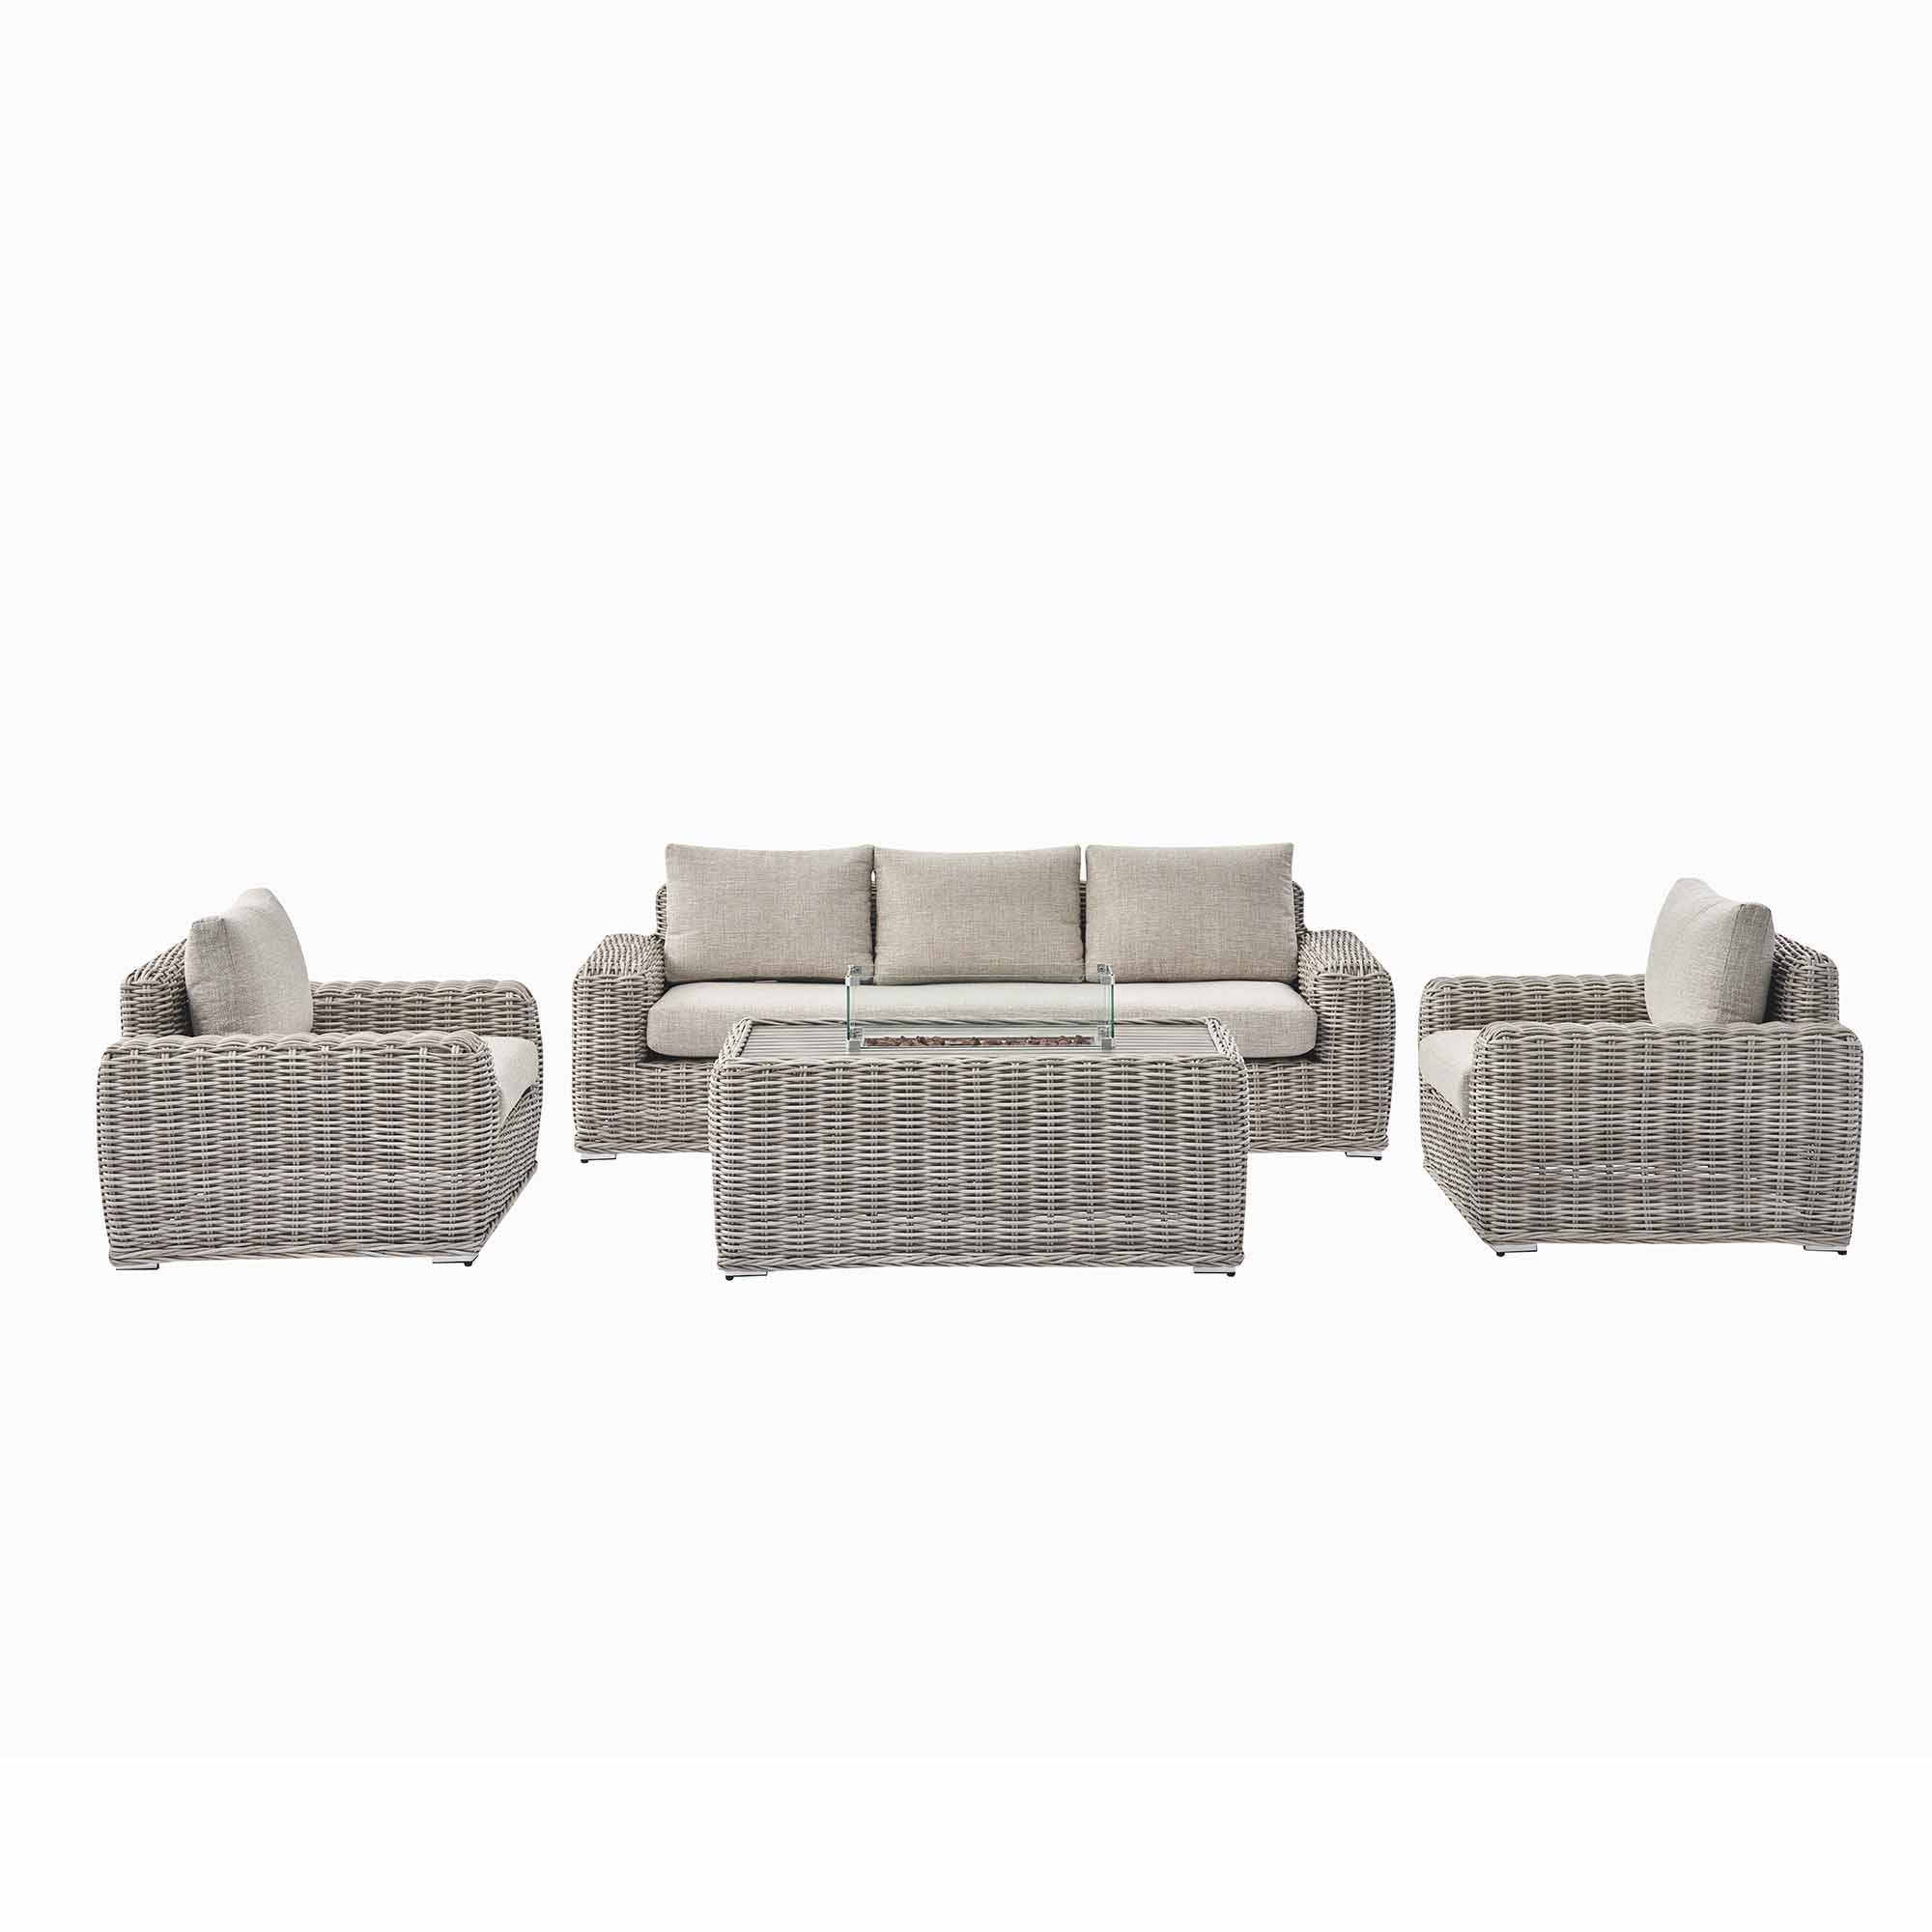 Bellagio Round Wicker Sofa Set with Firepit Coffee Table, Light Grey